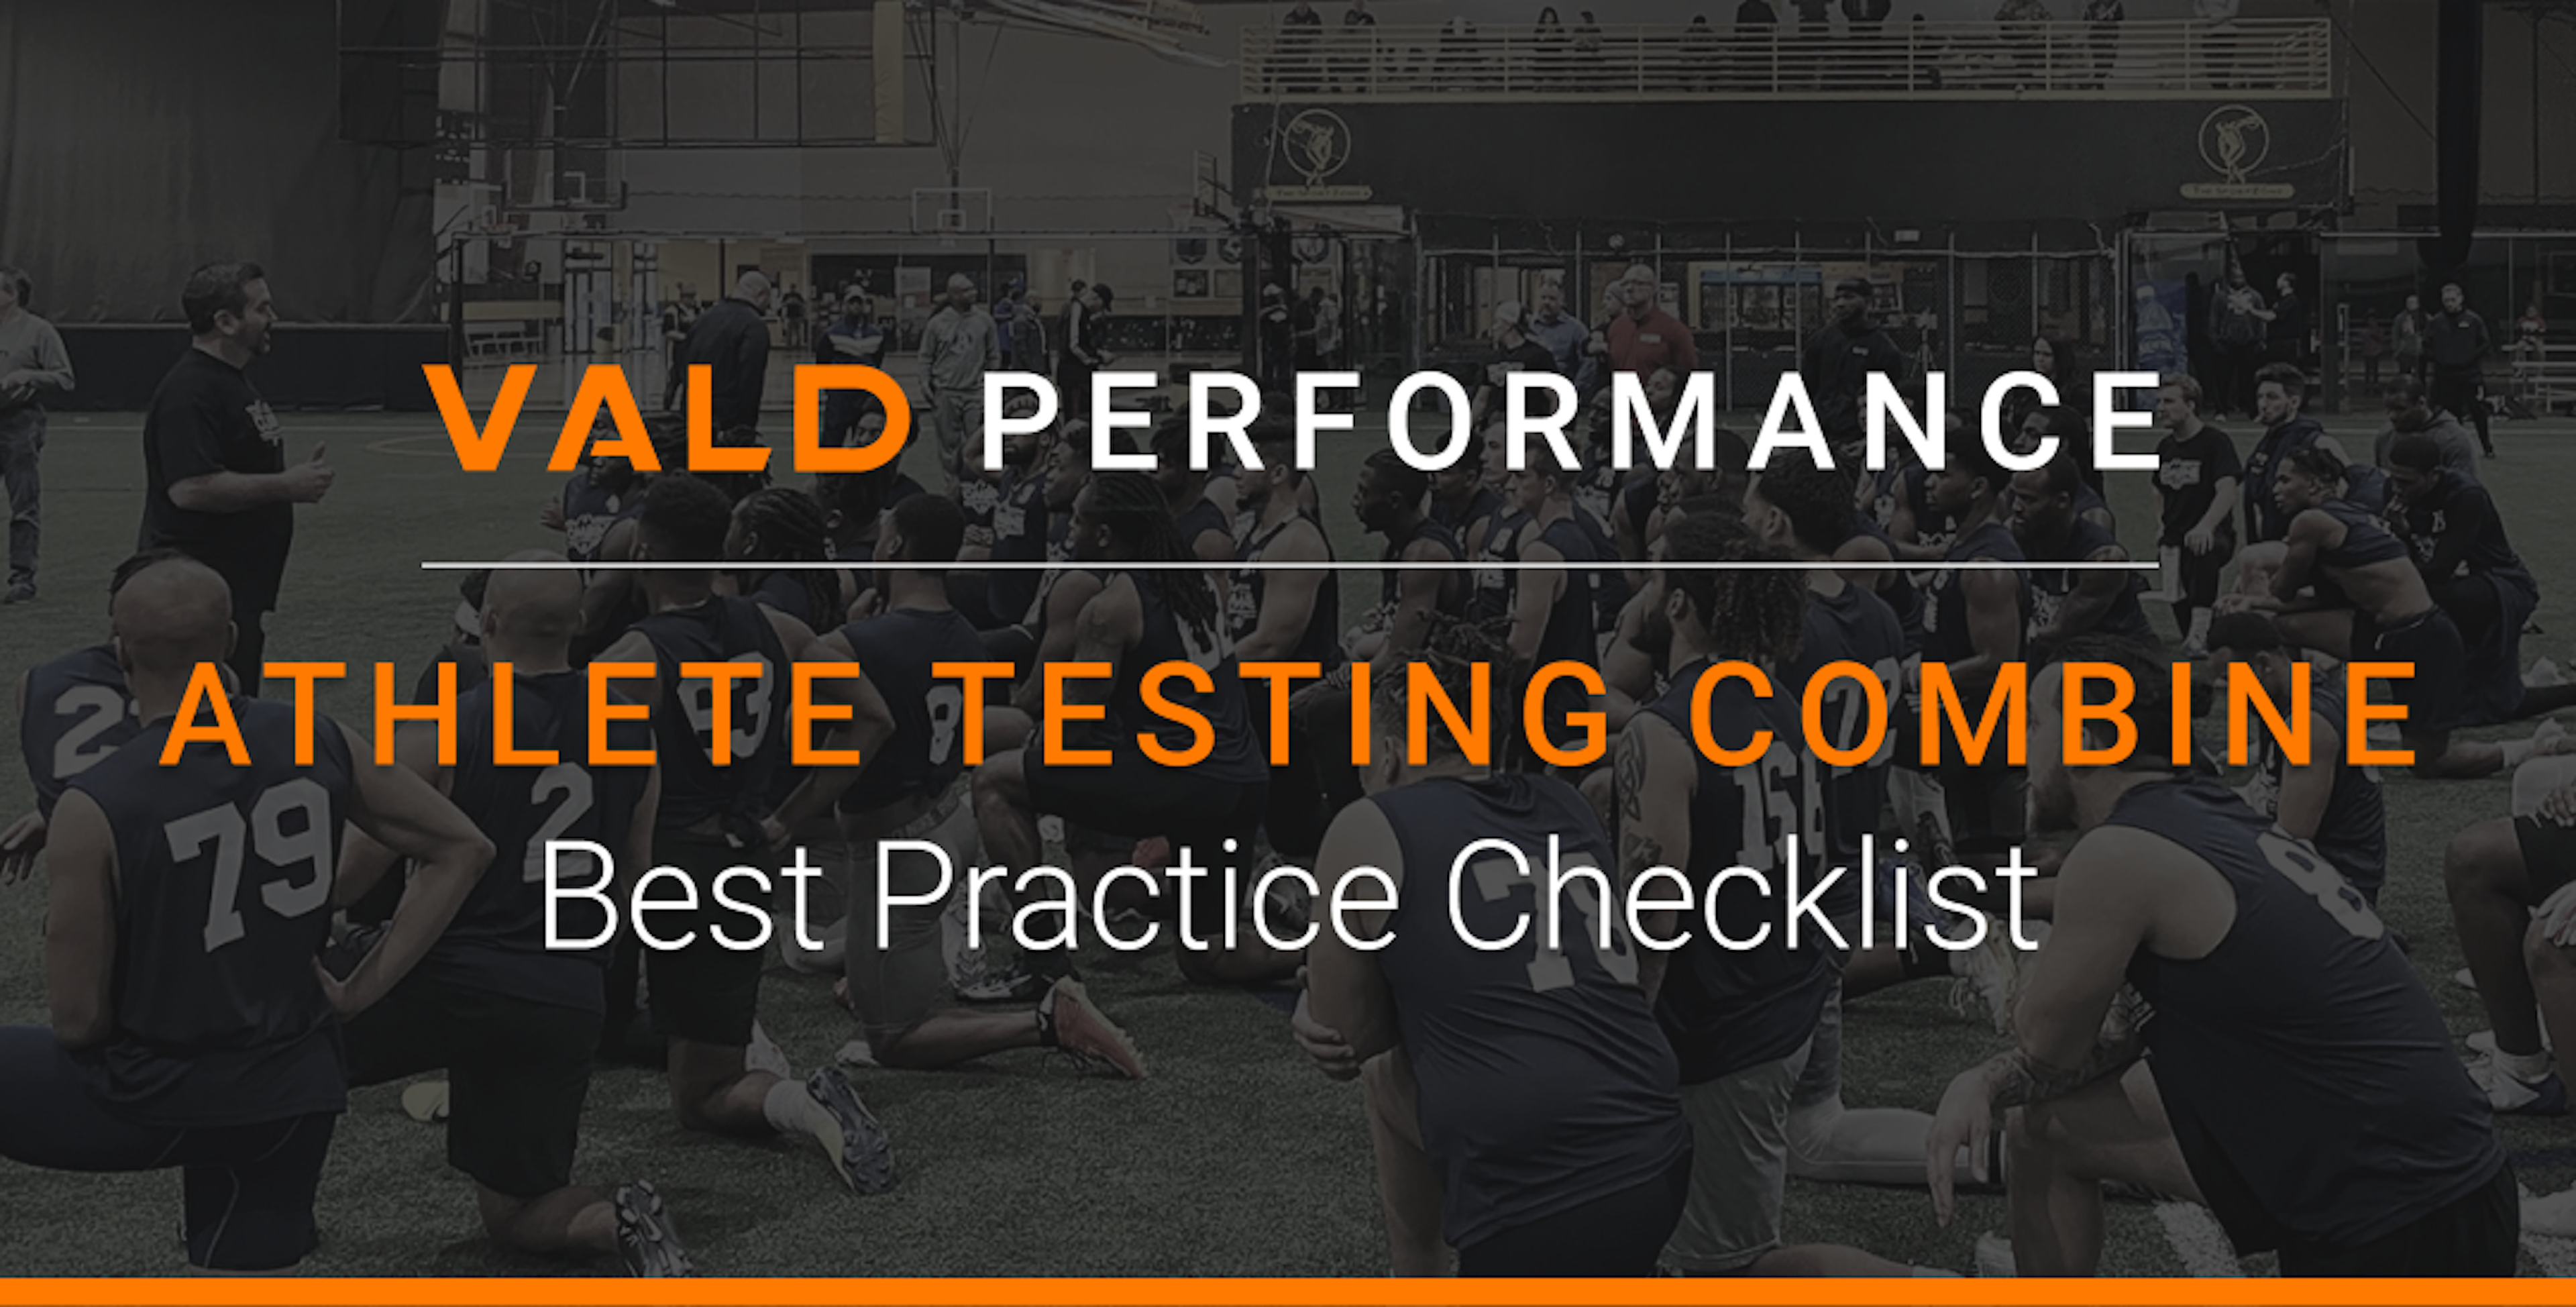 Thumbnail image for Athlete Testing Combine Best Practice Checklist